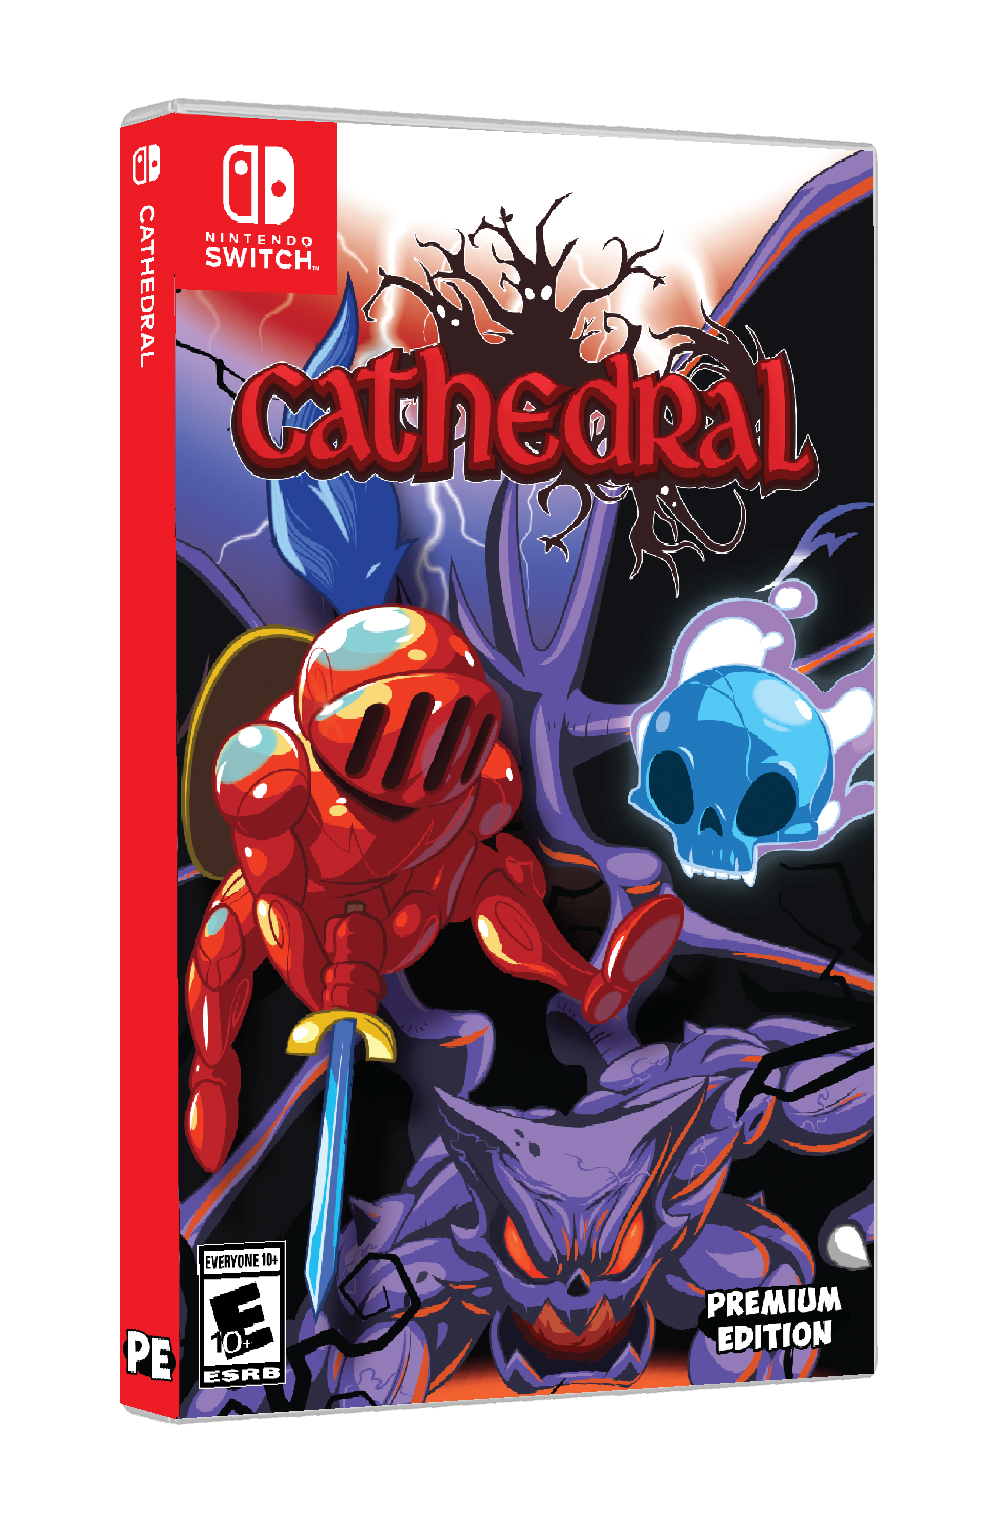 Cathedral - G4G Edition